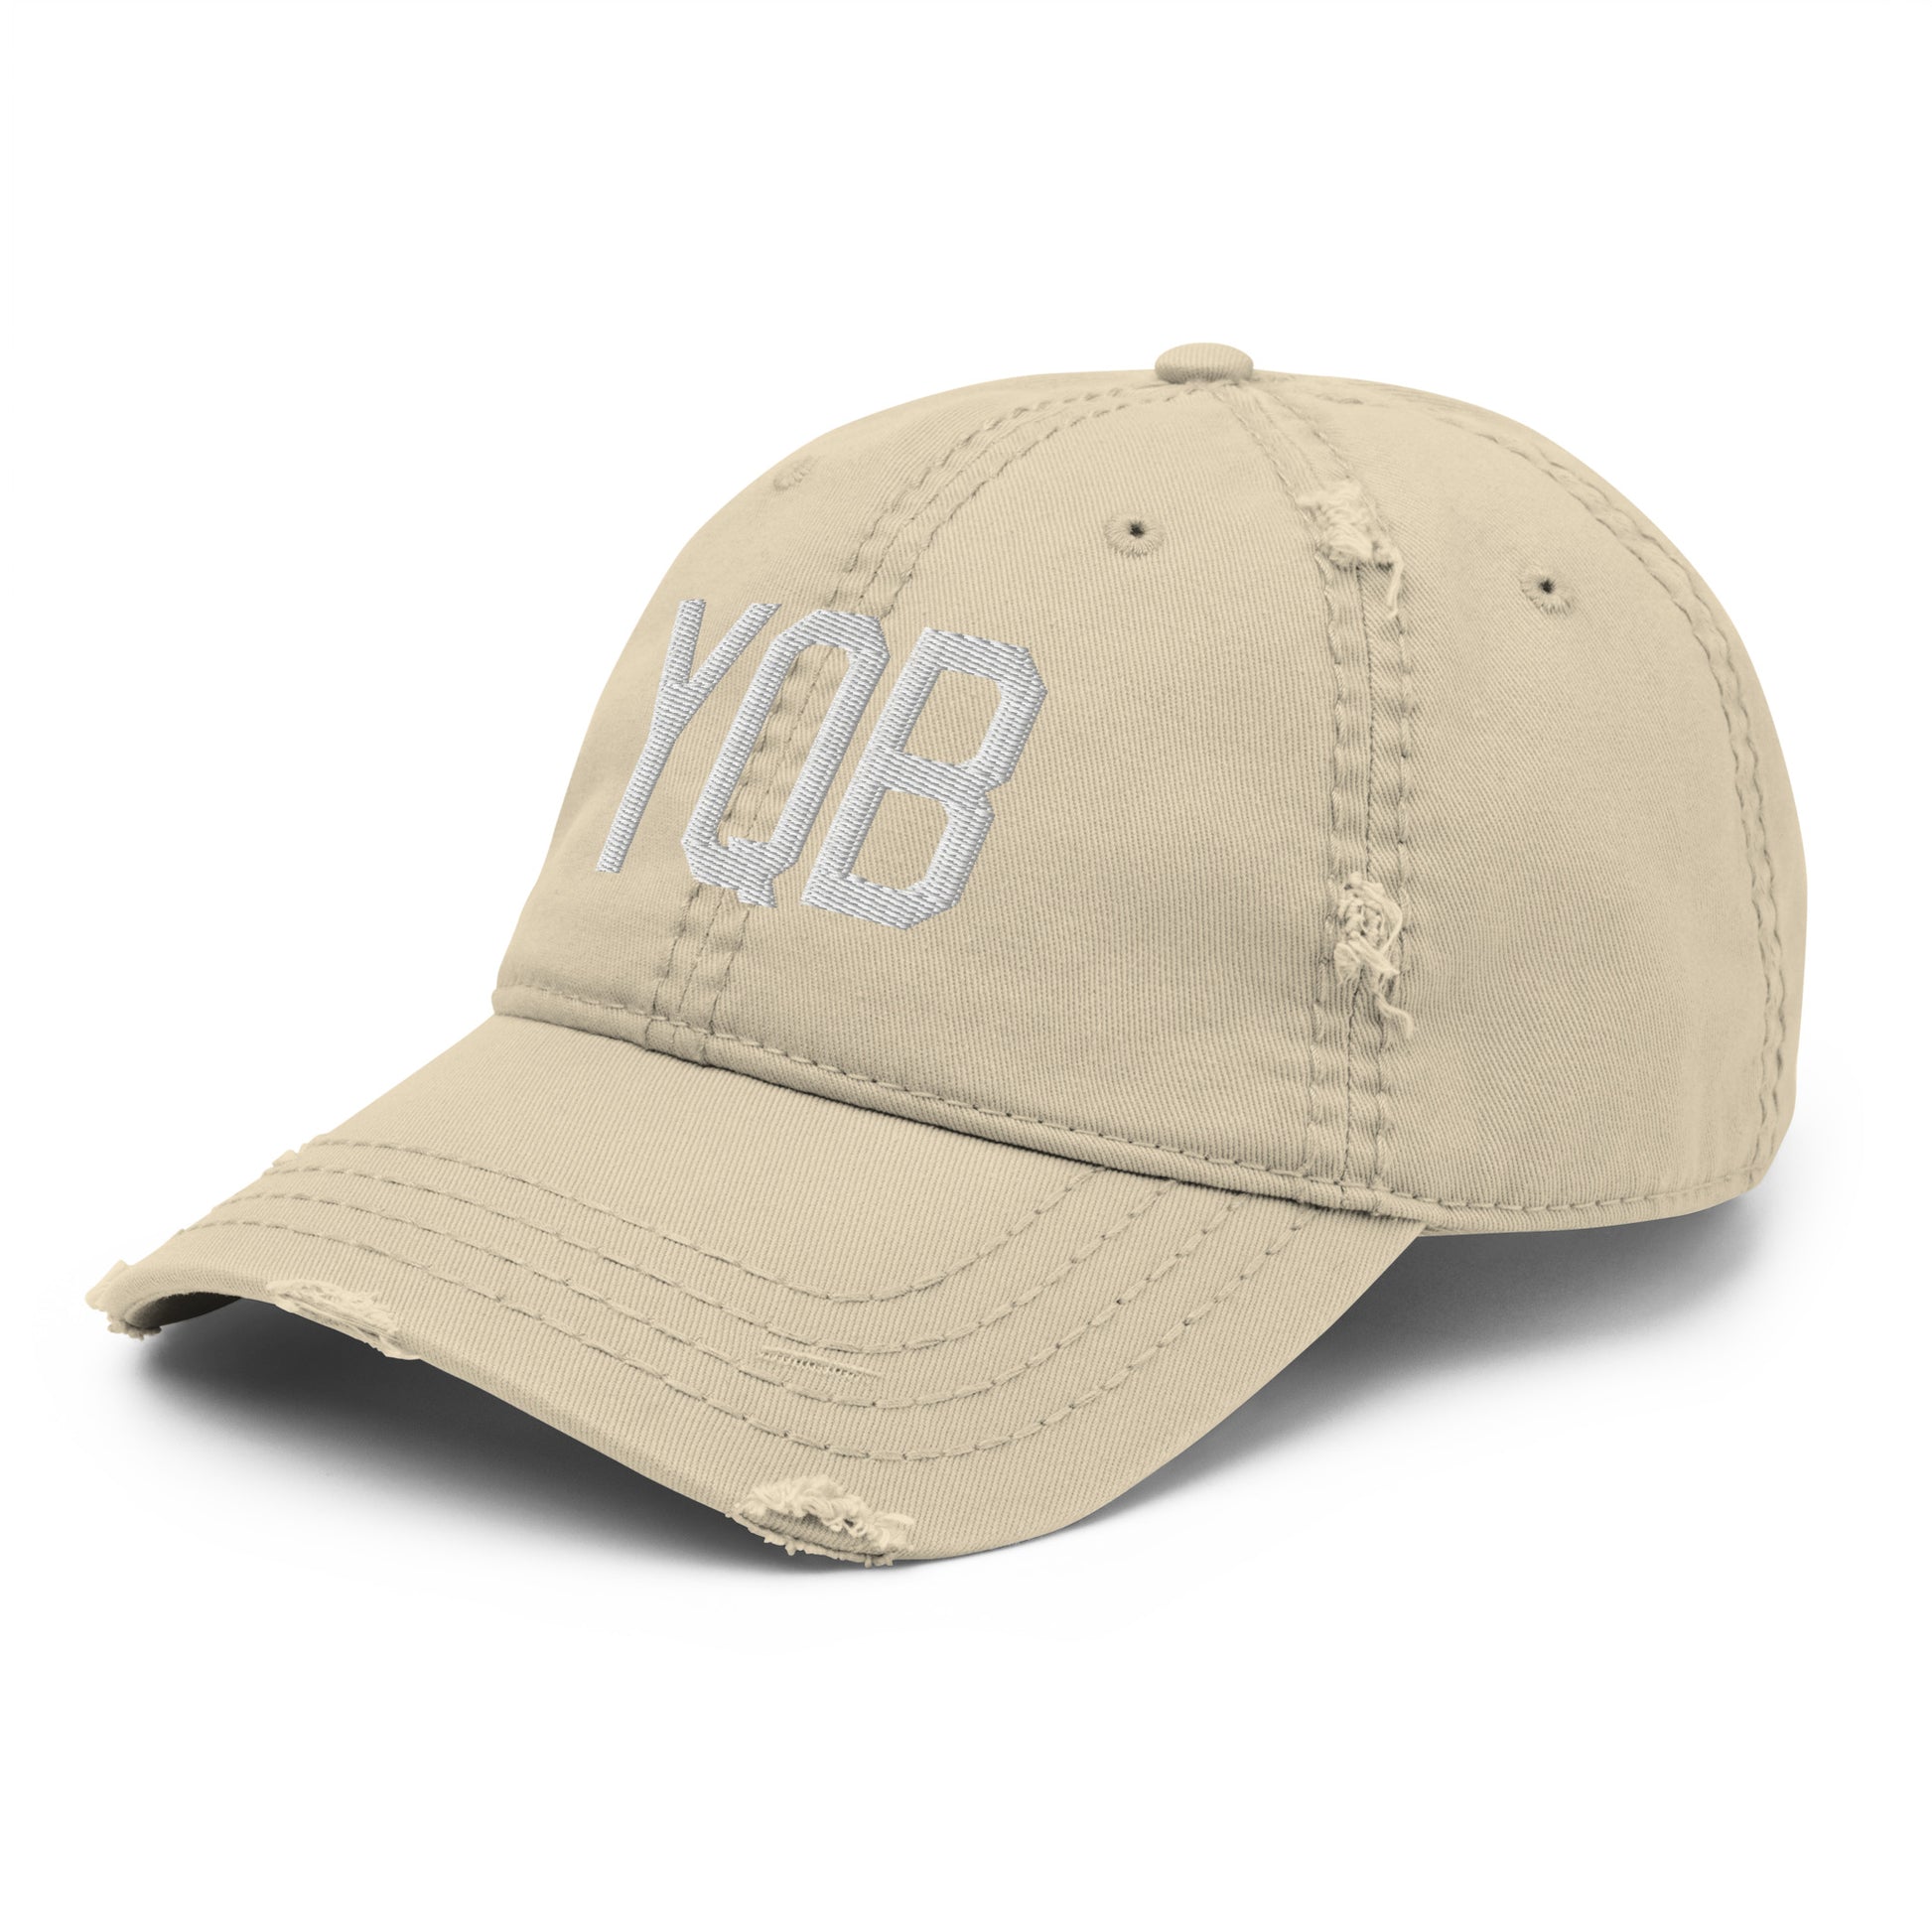 Airport Code Distressed Hat - White • YQB Quebec City • YHM Designs - Image 19